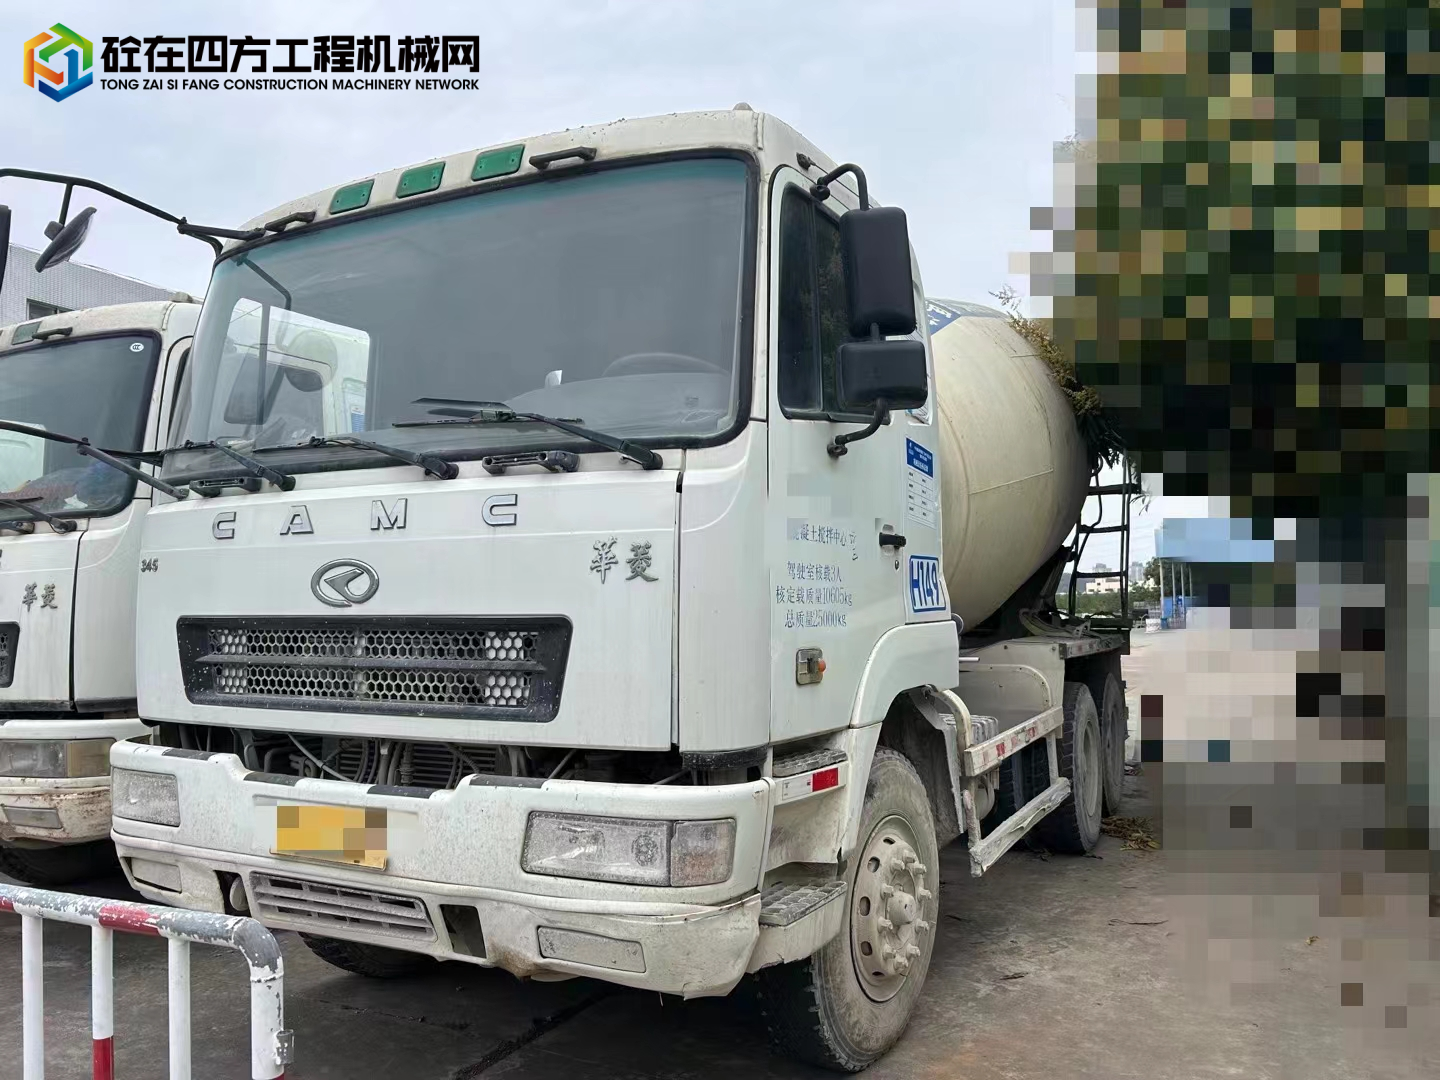 https://images.tongzsf.com/tong/truck_machine/20240227/165dd9cd2afe5a.jpg